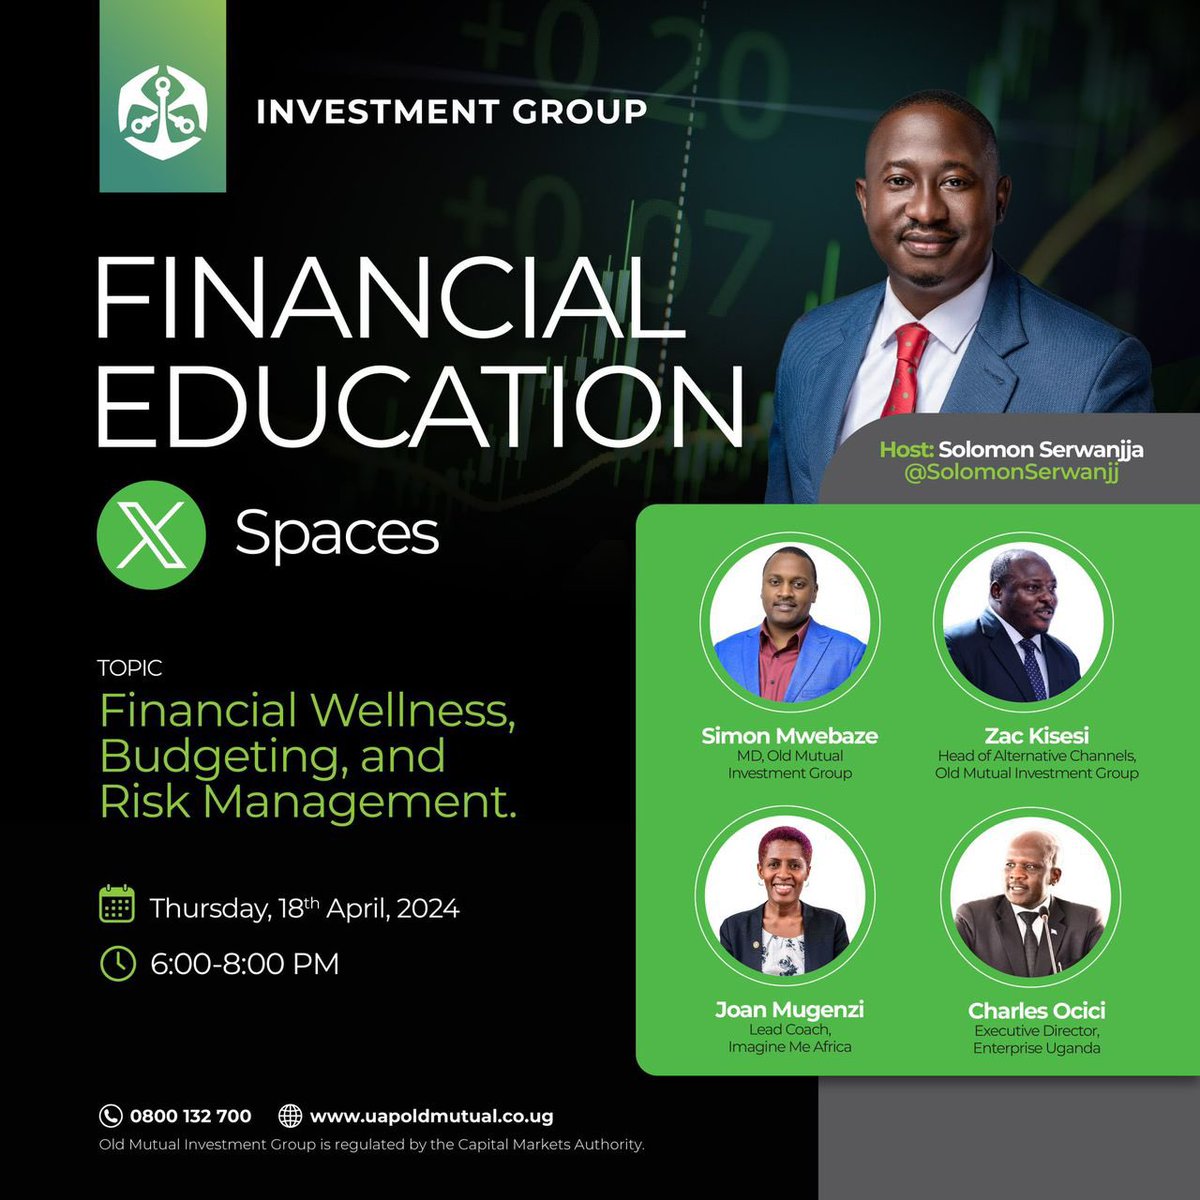 Today at exactly 6:00pm with @SolomonSerwanjj and team will be a Twitter Space about about Financial wellness, budgeting and risk management. Set a reminder 👉 twitter.com/i/spaces/1lDxL… #DollarUnitTrust #TutambuleFfena @UAPOldMutualUg